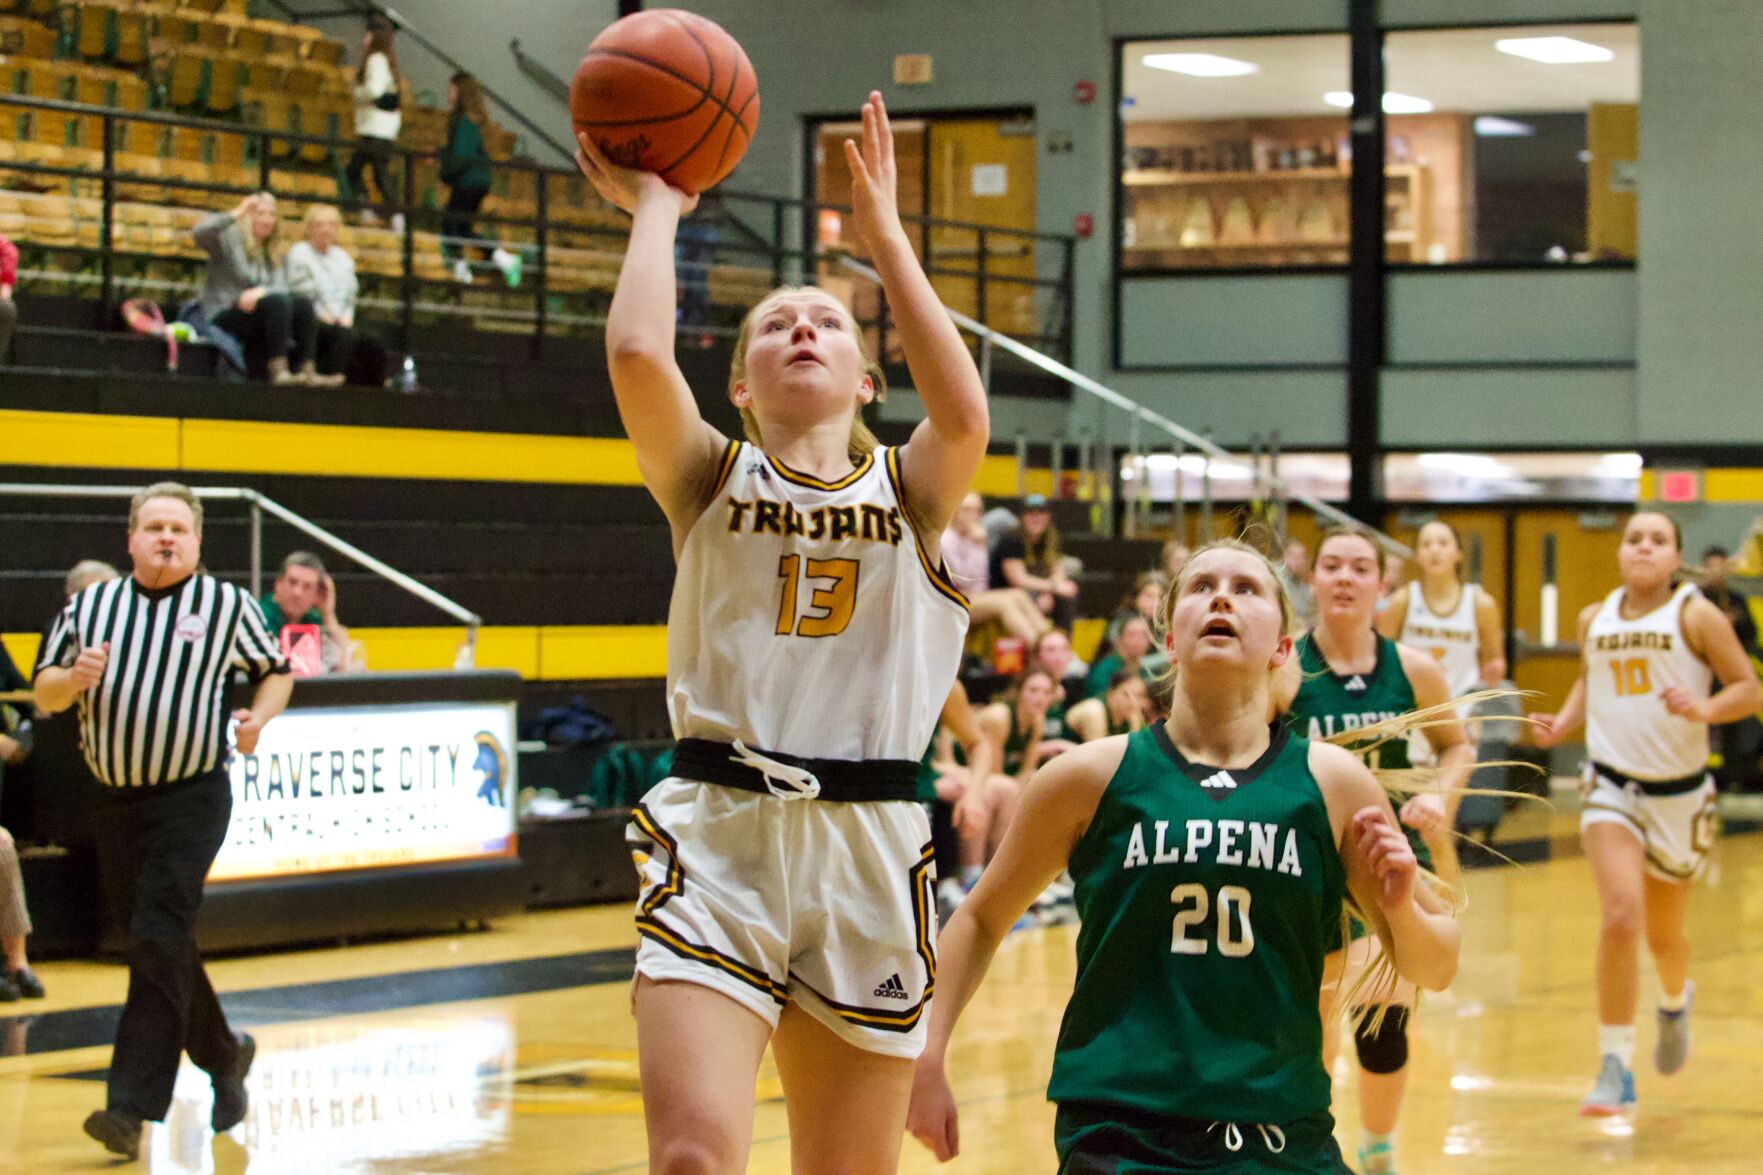 Traverse City Central Girls Undefeated; Onekama Upsets NWC Standings